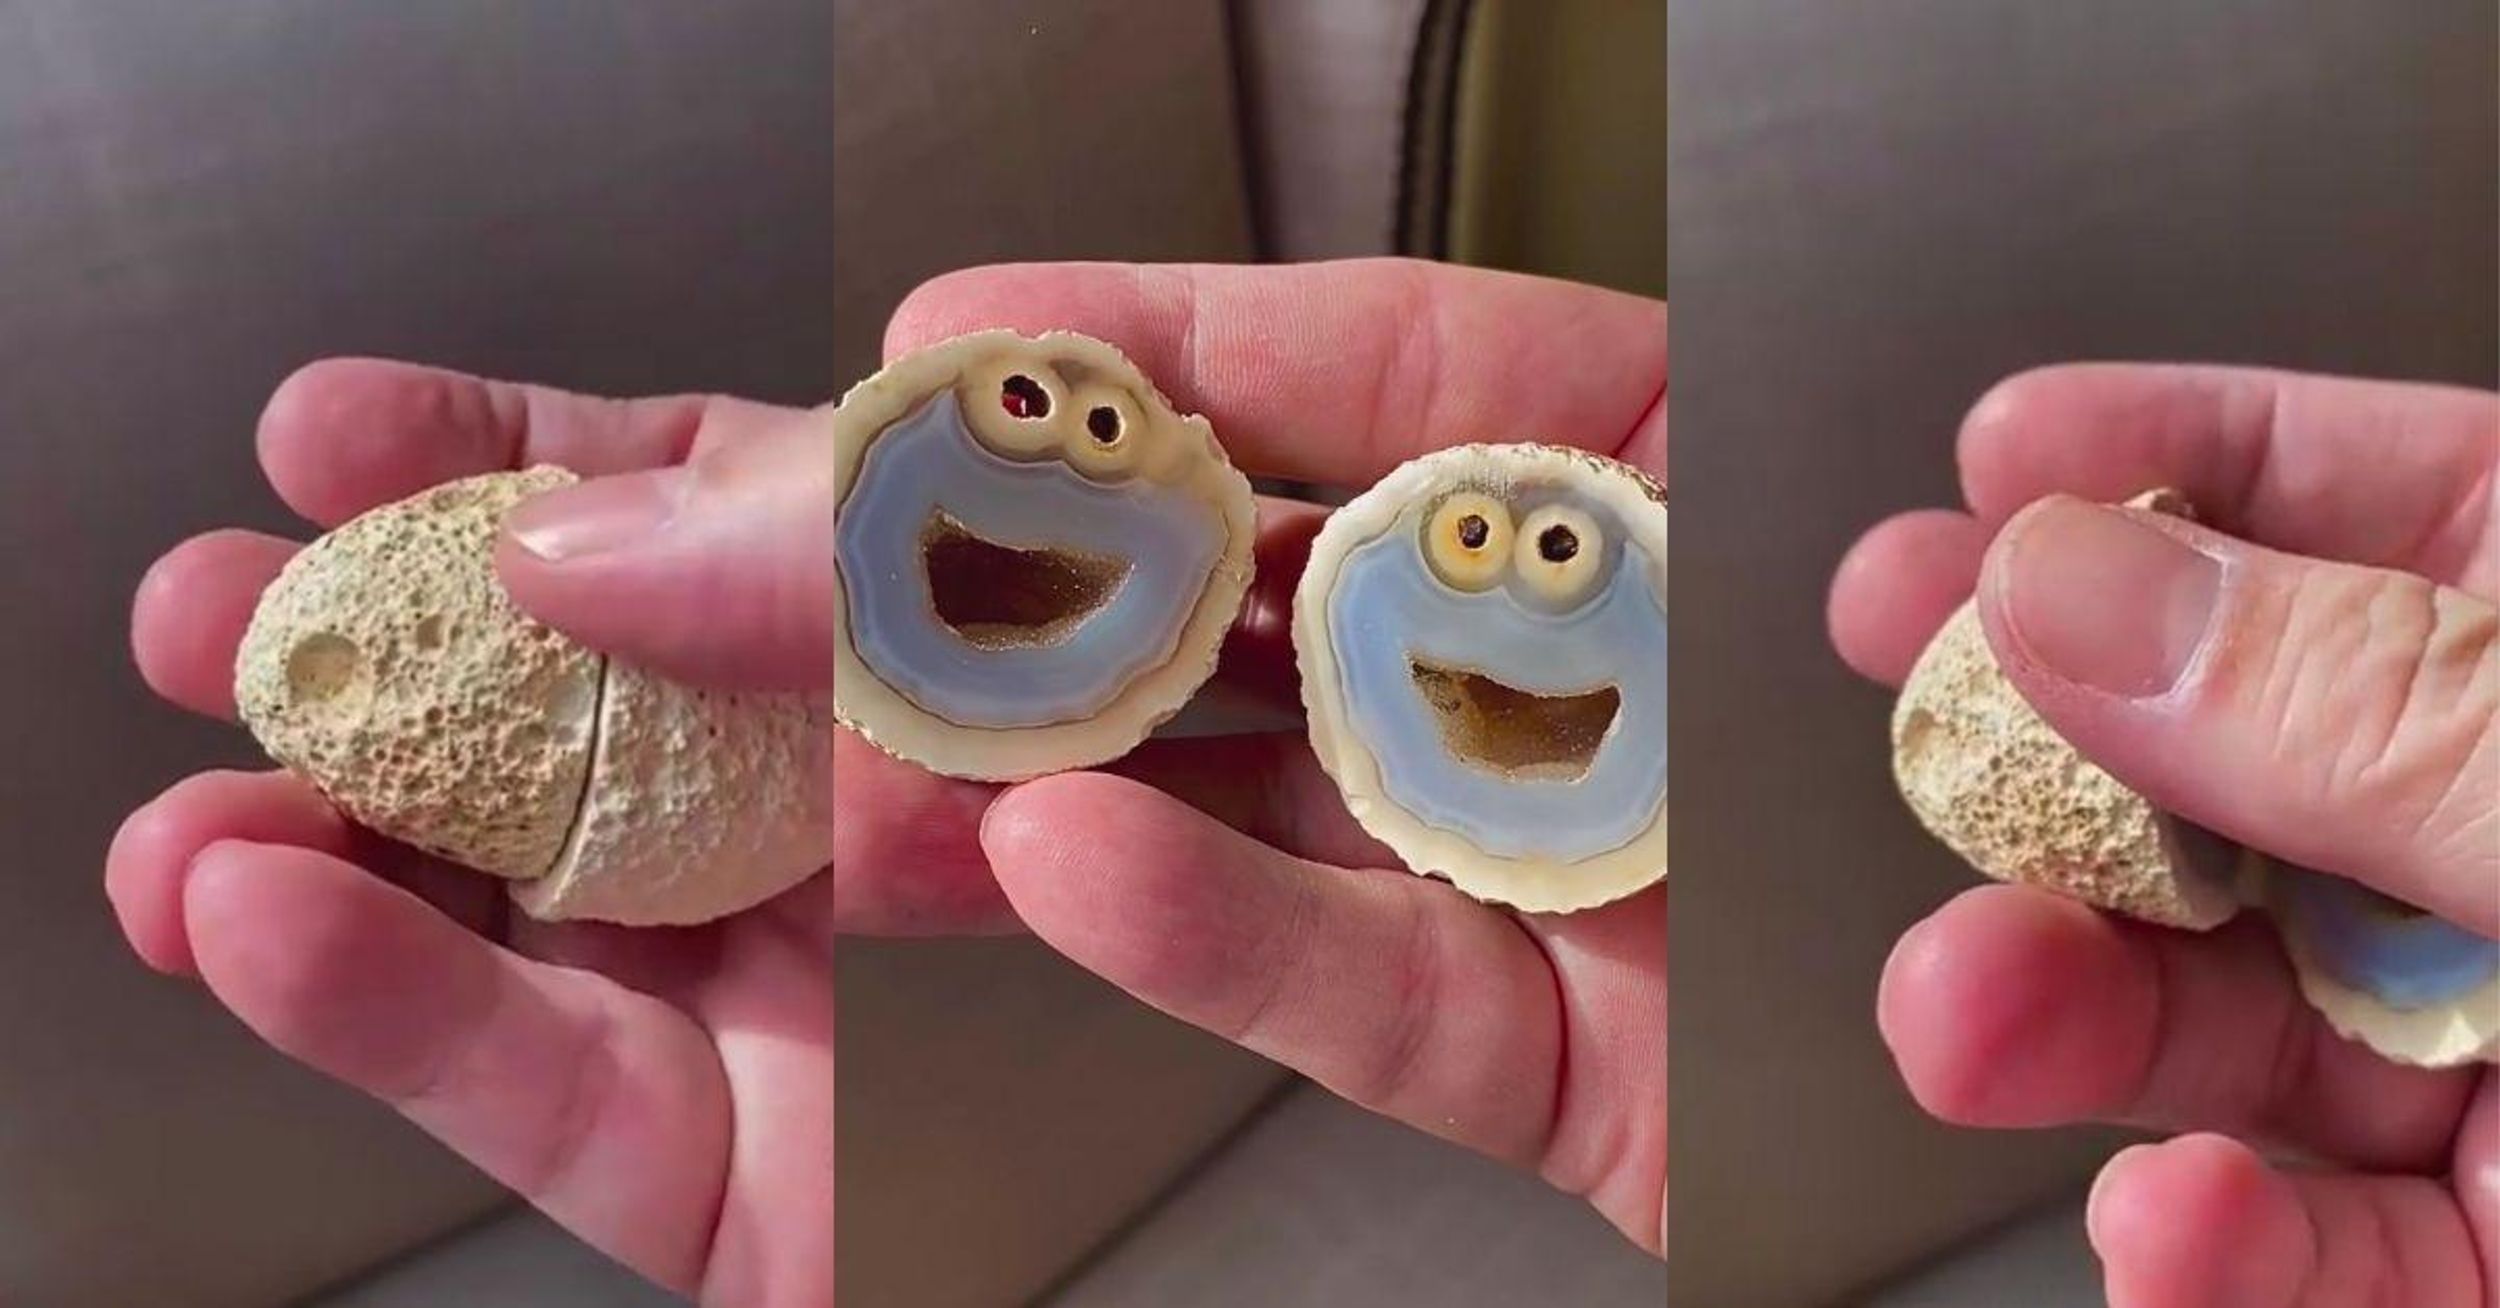 Cookie Monster Says What We're All Thinking After Discovery Of Rock Whose Insides Look Just Like Him